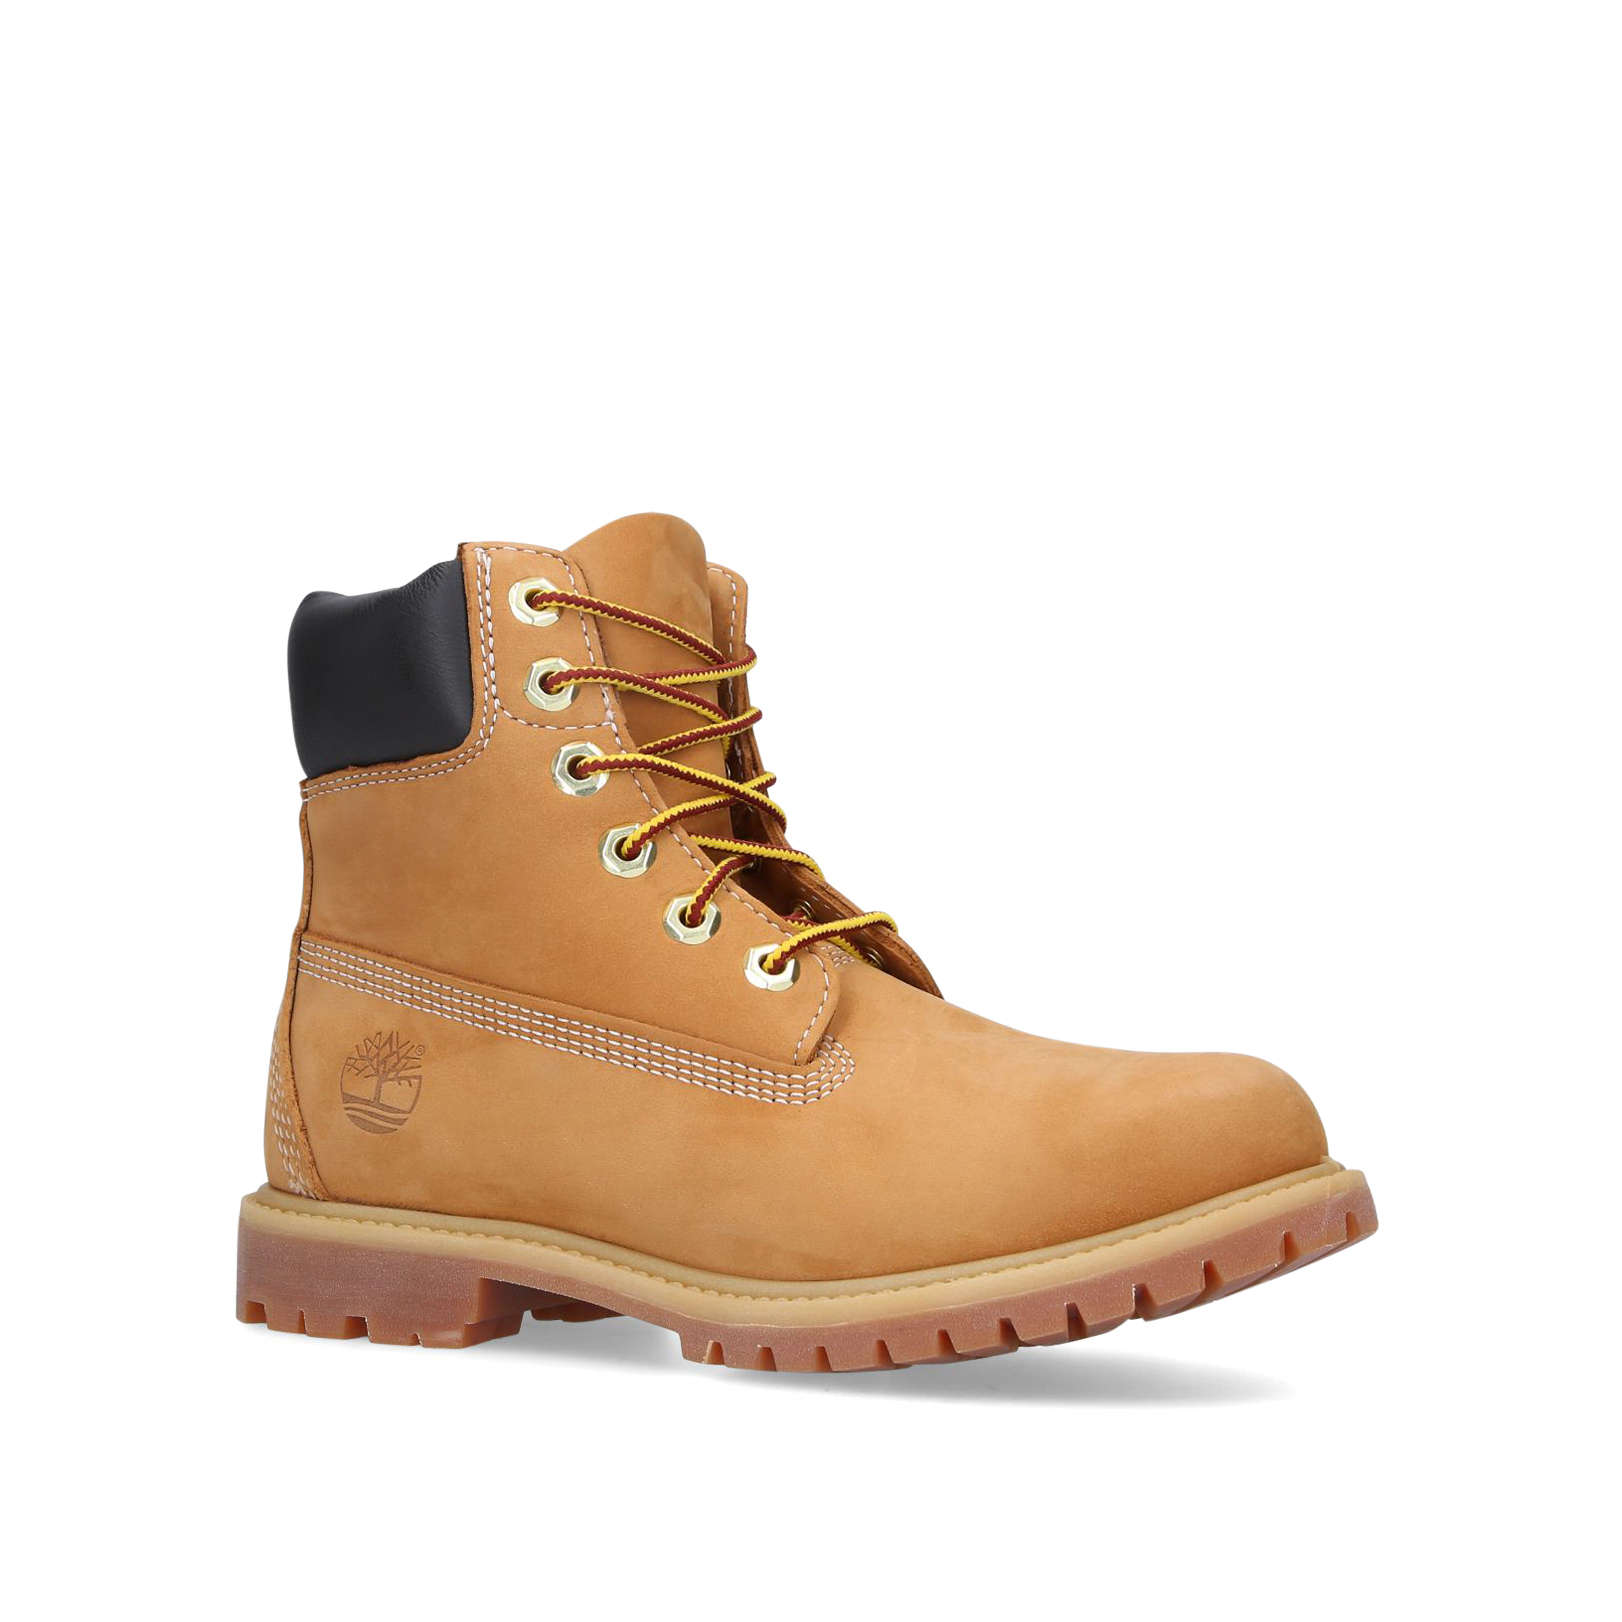 6IN PREMIUM BOOT - WP - TIMBERLAND Ankle Boots